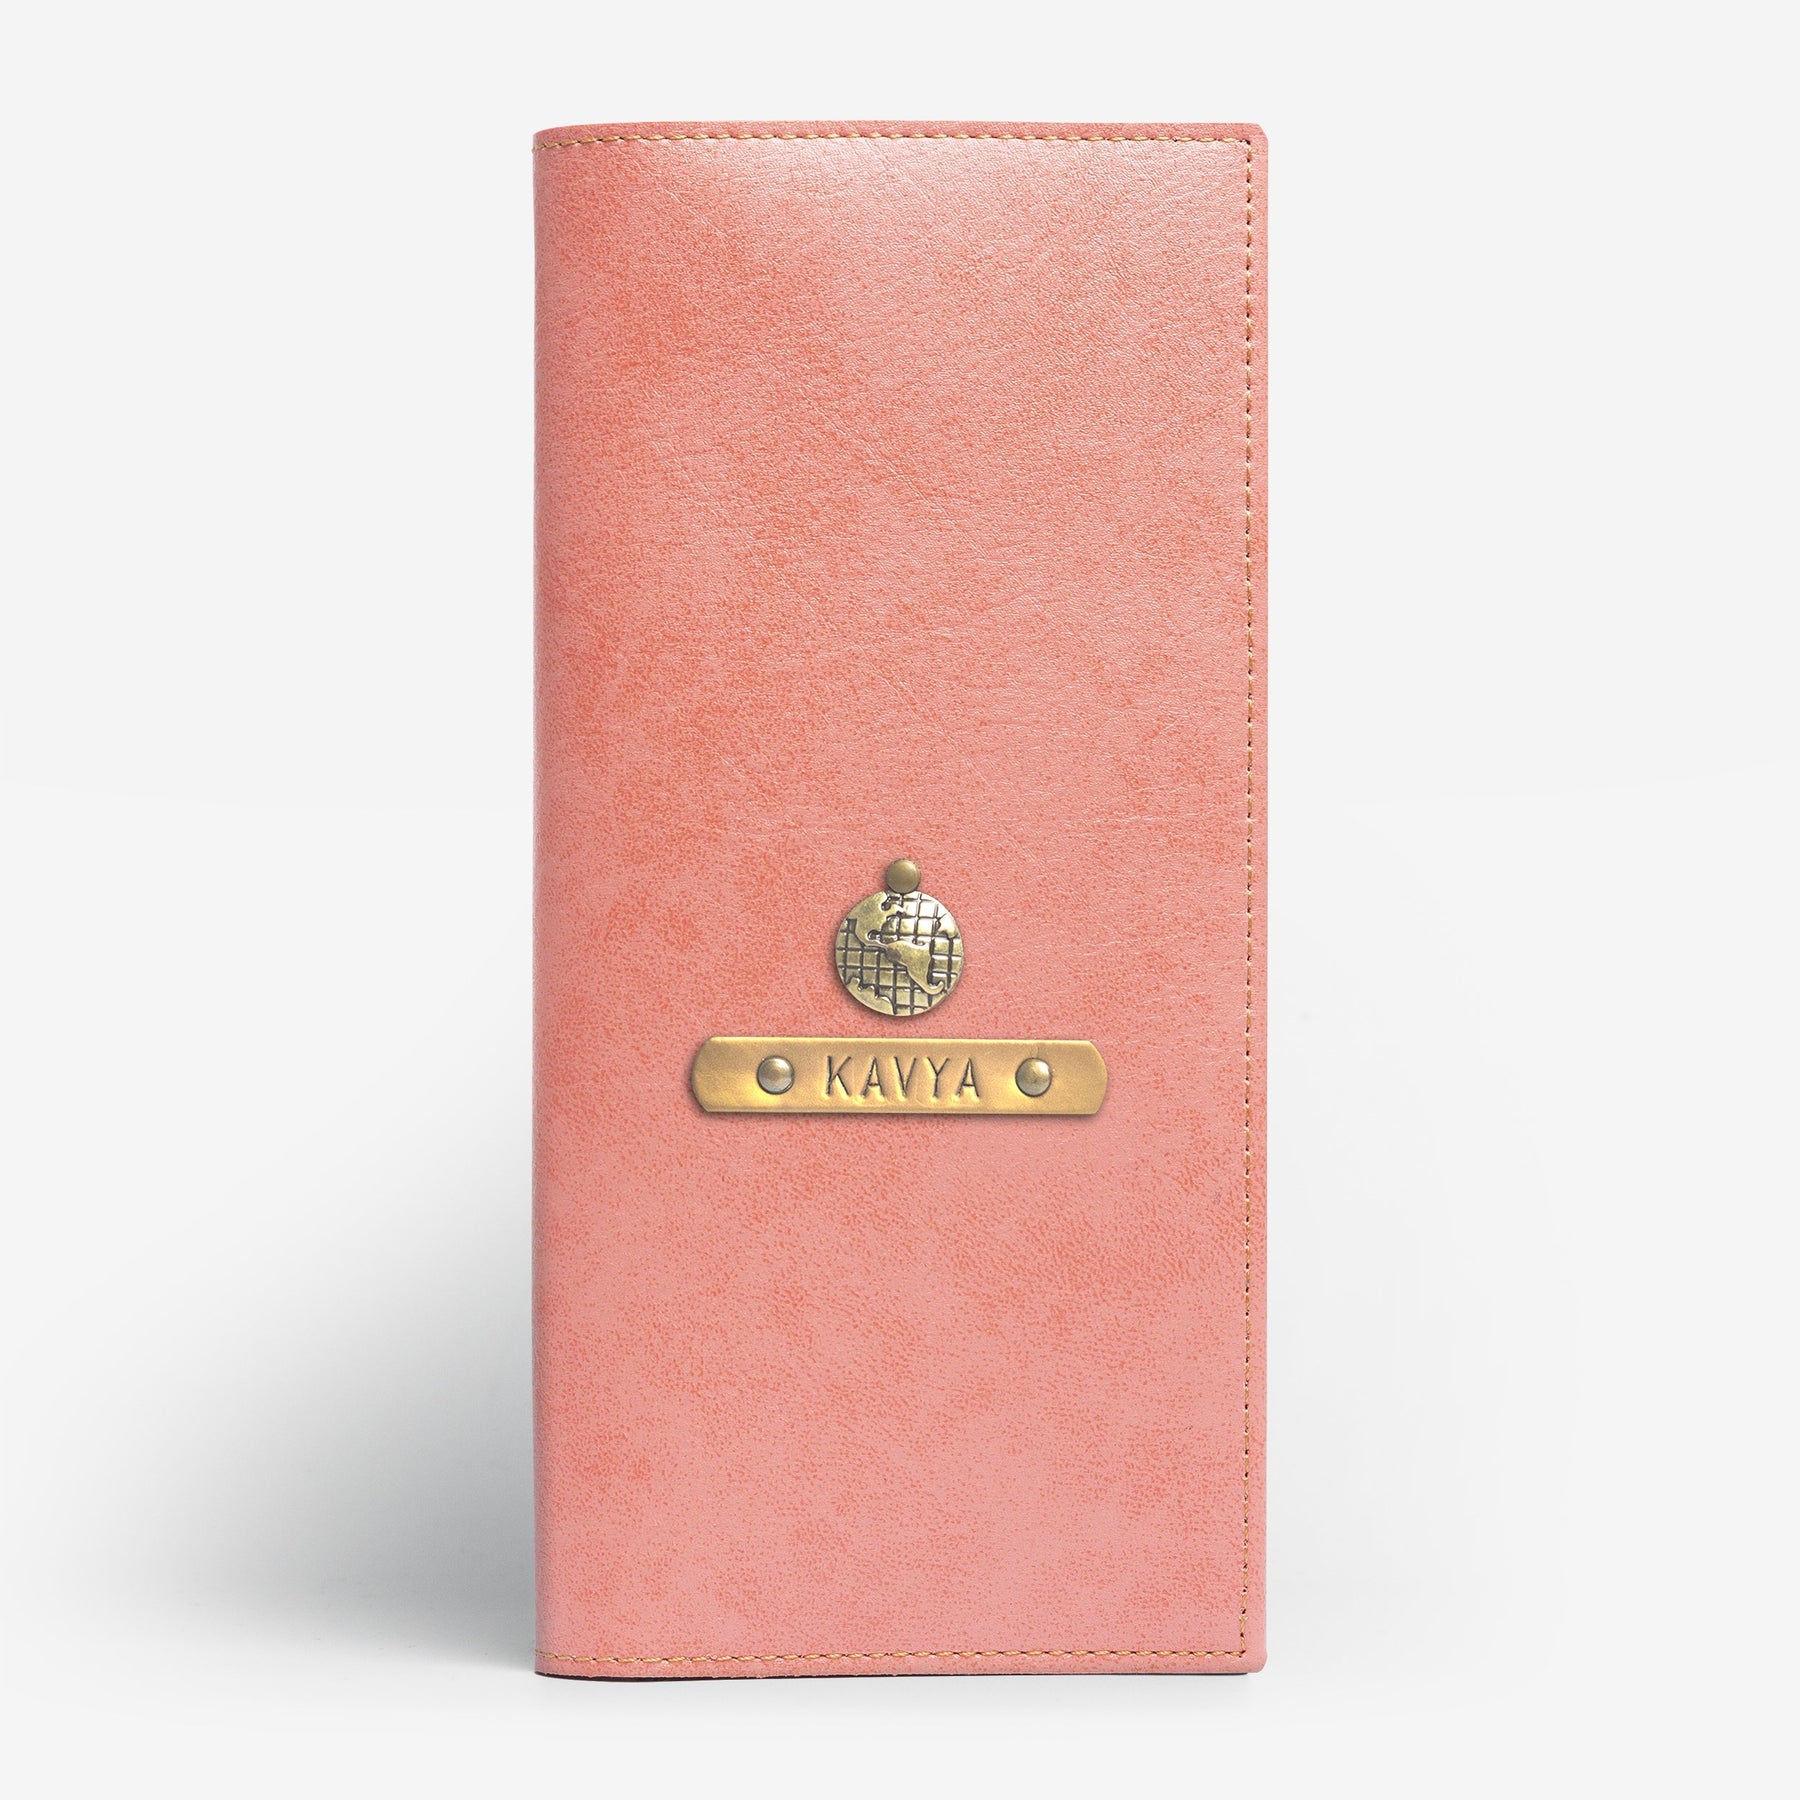 Personalized Travel Wallet - Peach